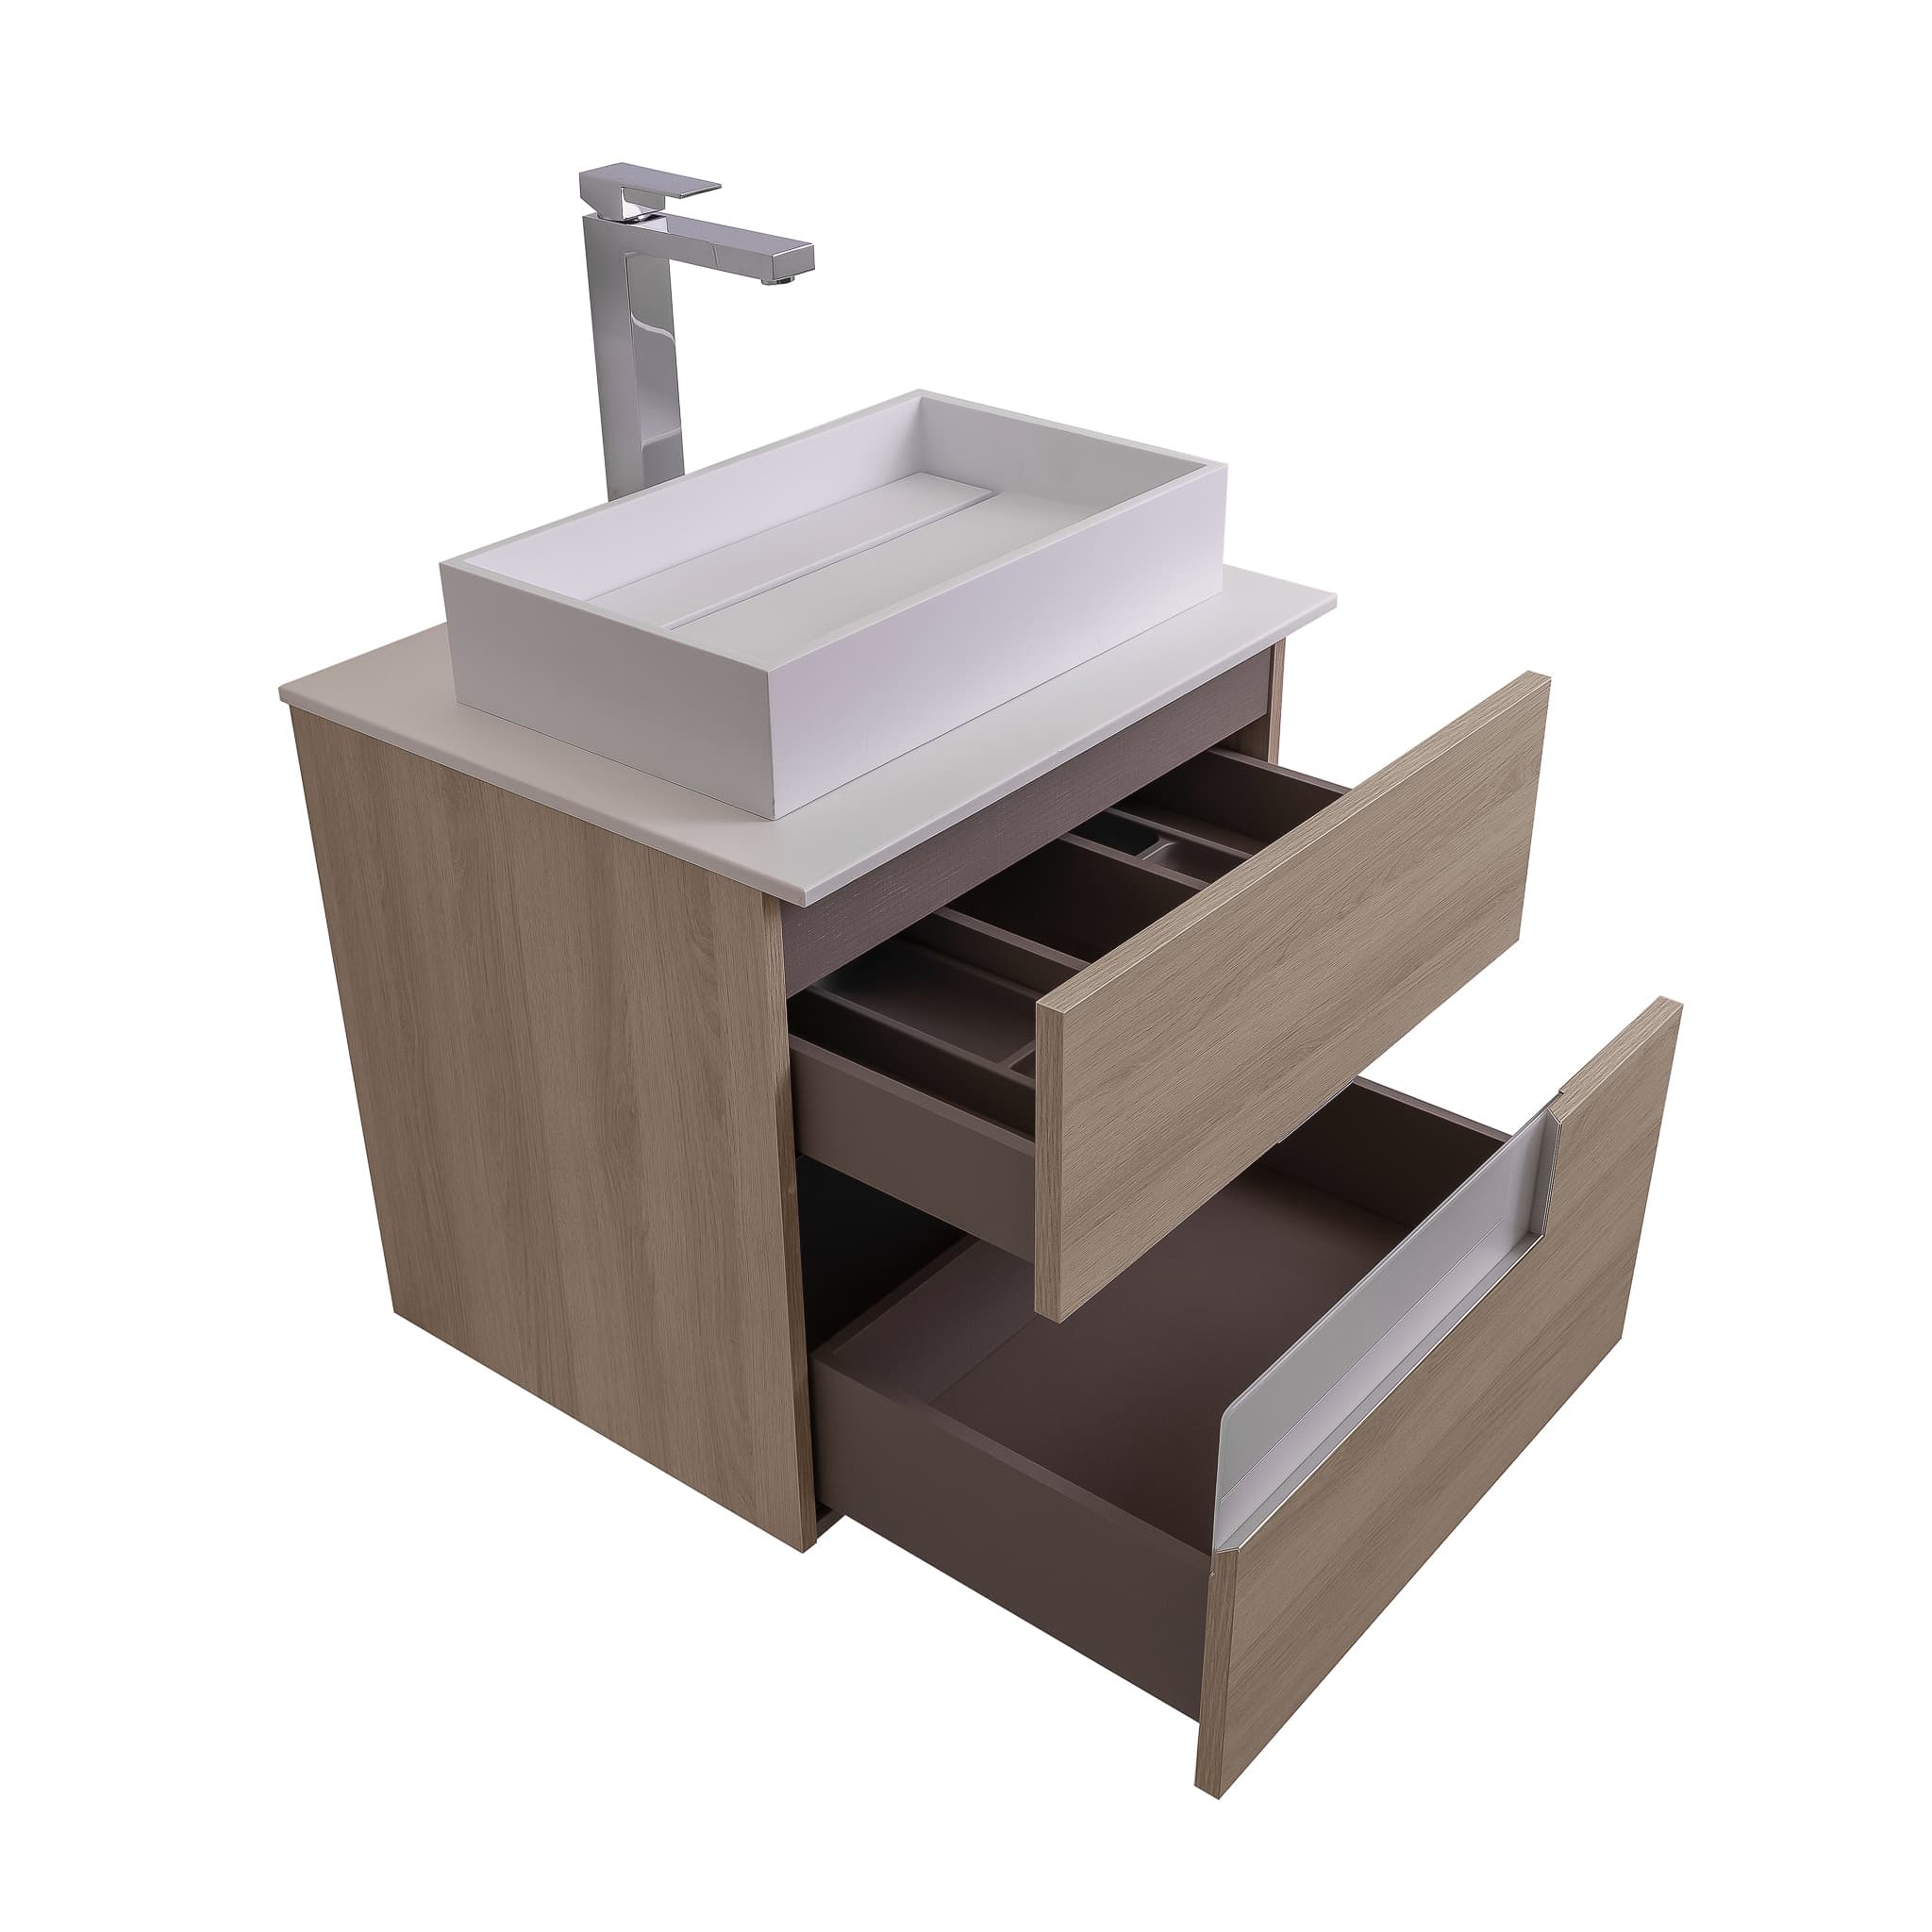 Vision 23.5 Natural Light Wood Cabinet, Solid Surface Flat White Counter And Infinity Square Solid Surface White Basin 1329, Wall Mounted Modern Vanity Set